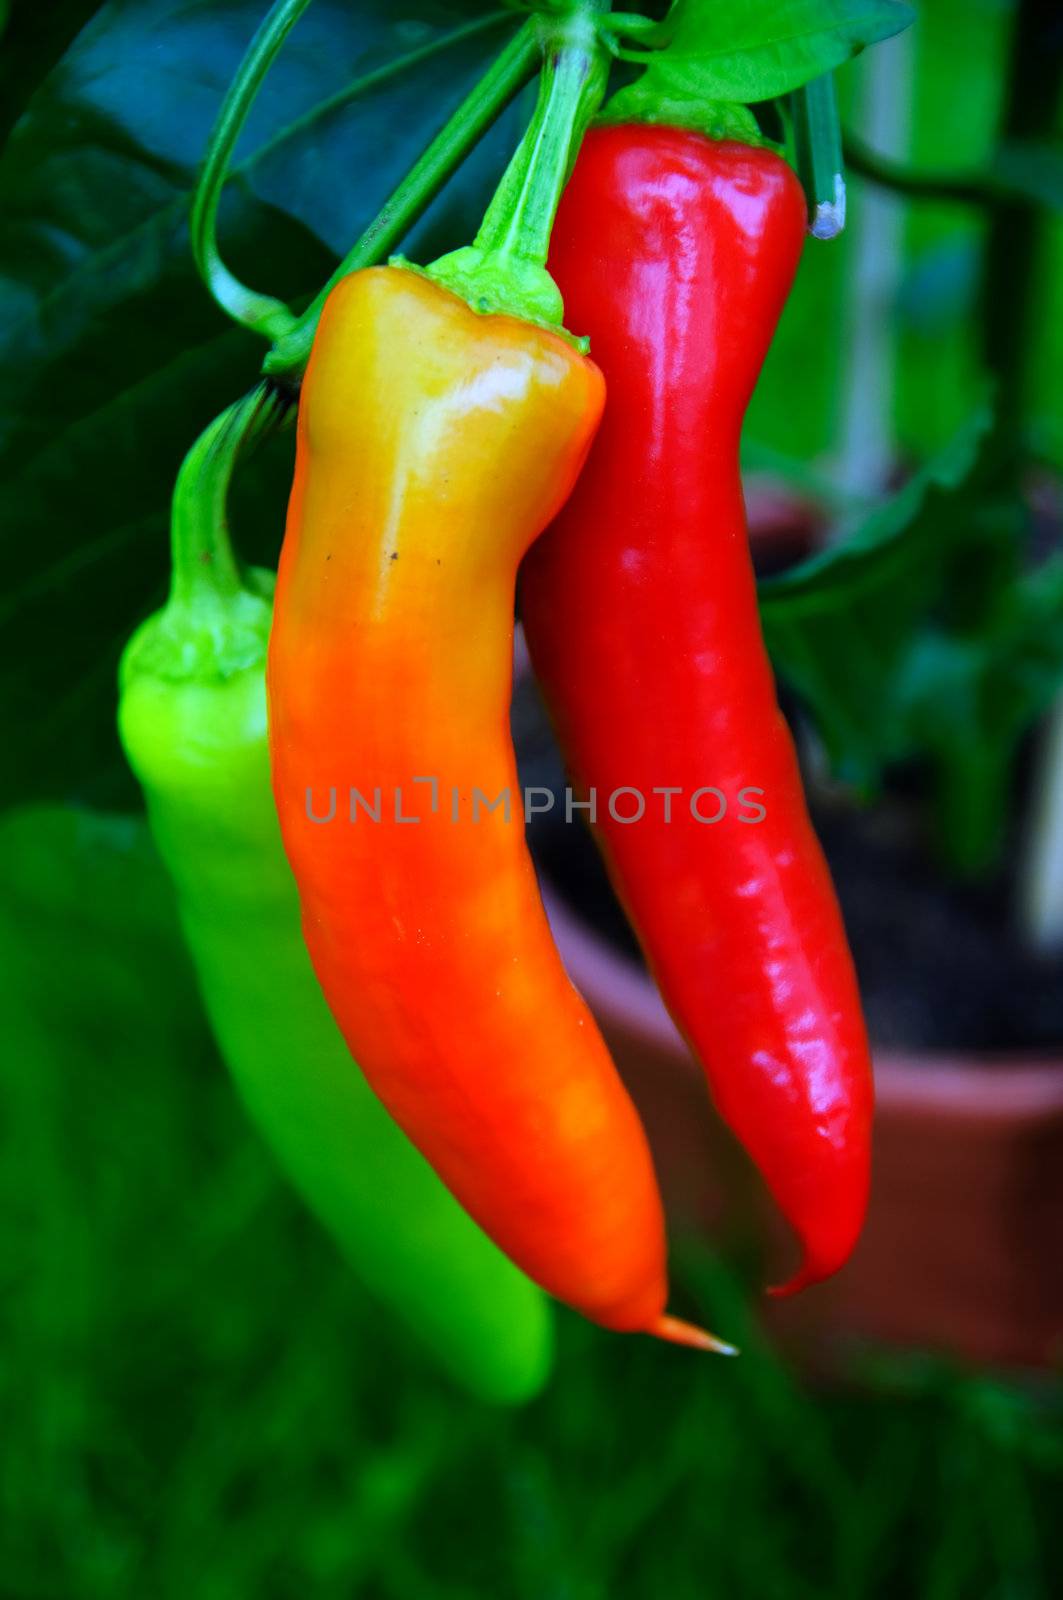 Cultivate chili peppers by GryT